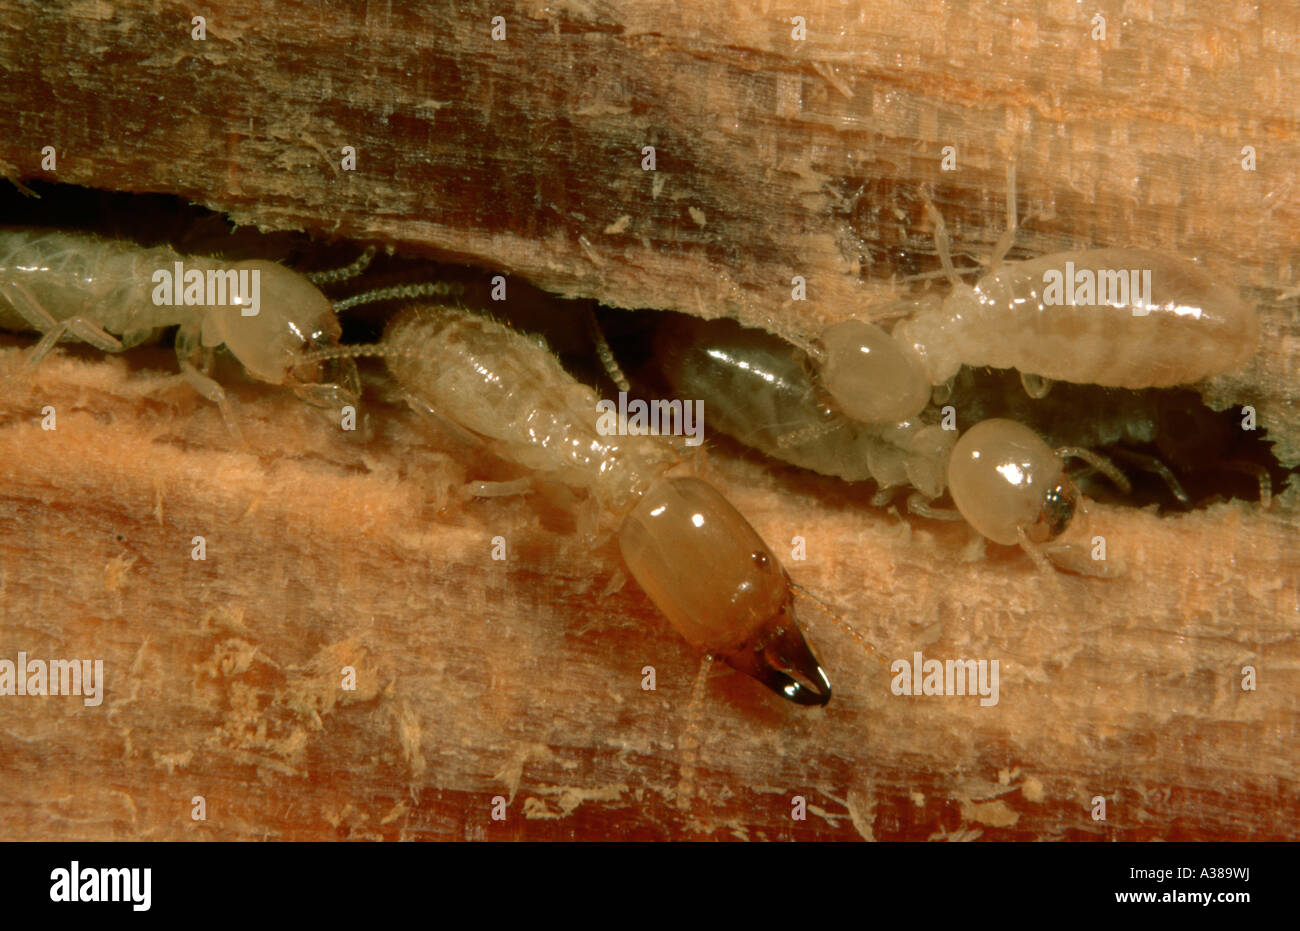 Termites, Reticulitermes lucifugus. Soldier and workers on timber Stock Photo